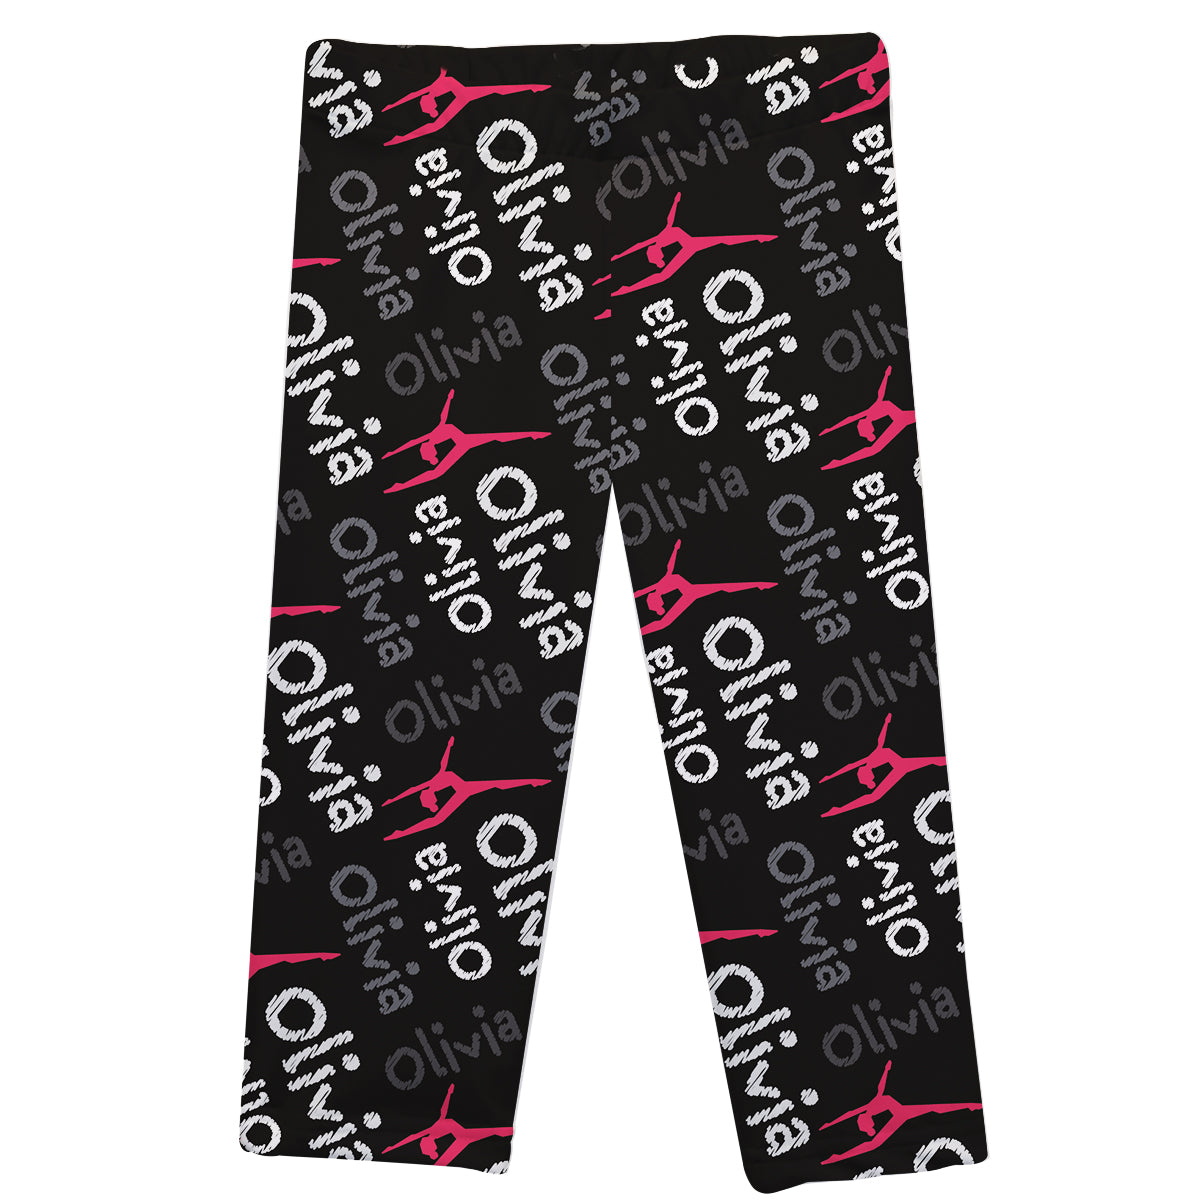 Black and pink girls dance leggings - Wimziy&Co.